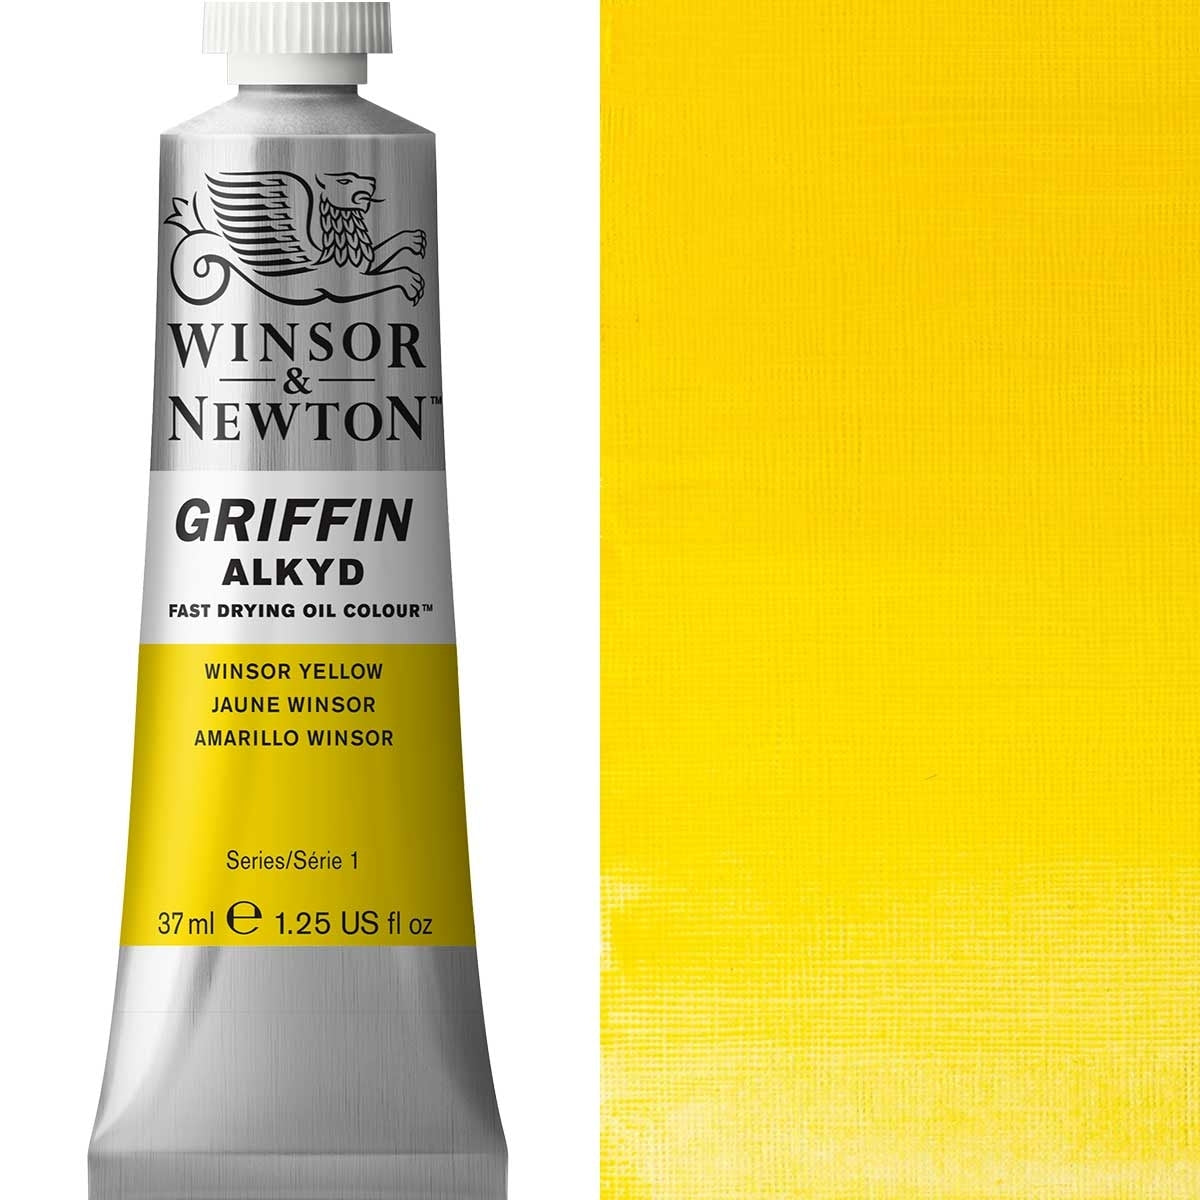 Winsor and Newton - Griffin ALKYD Oil Colour - 37ml - Winsor Yellow